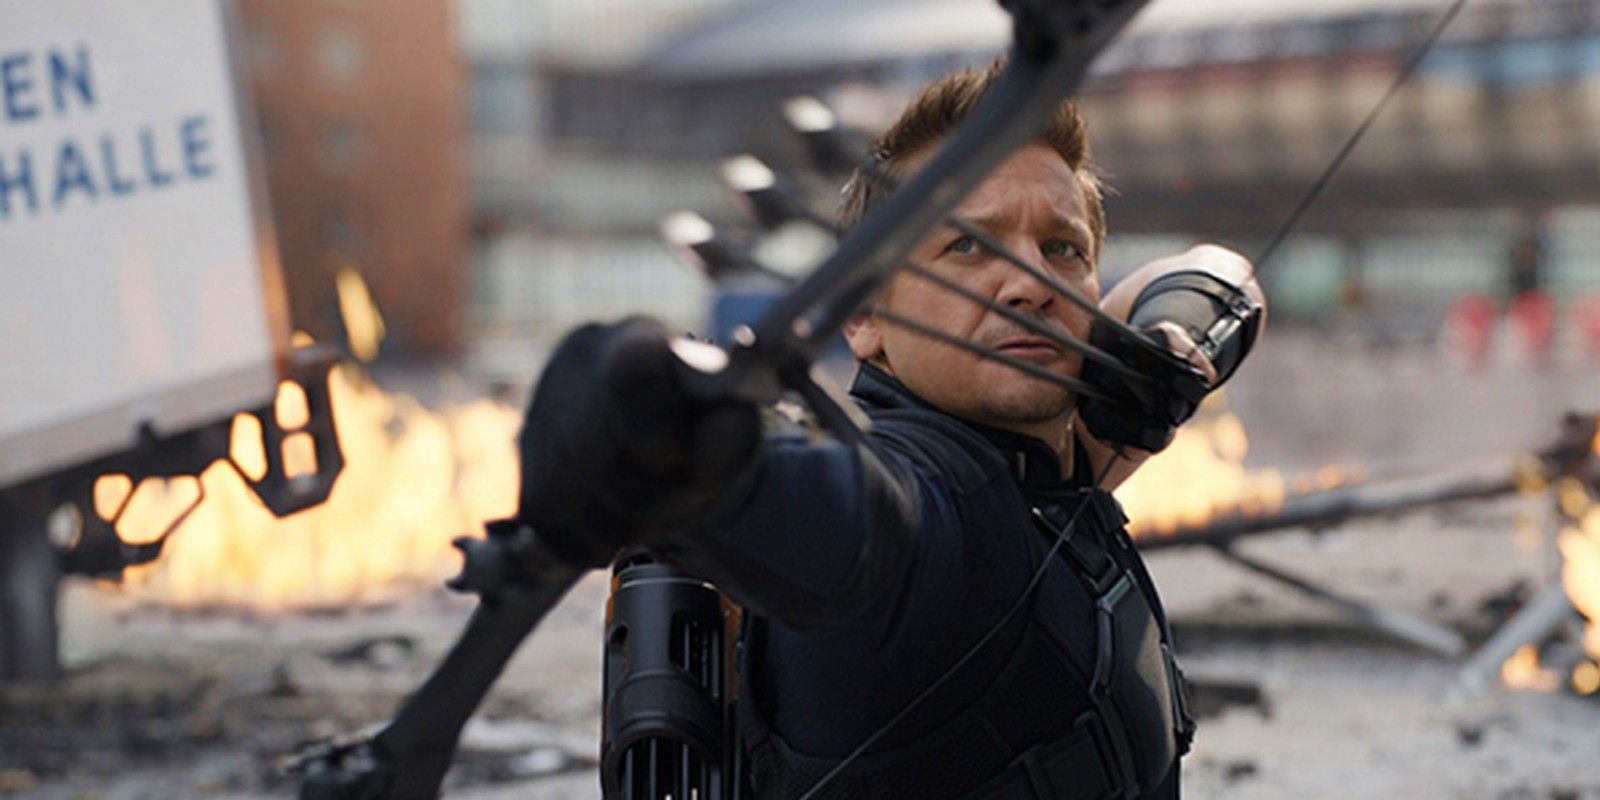 Hawkeye shoots three arrows from his bow in the MCU